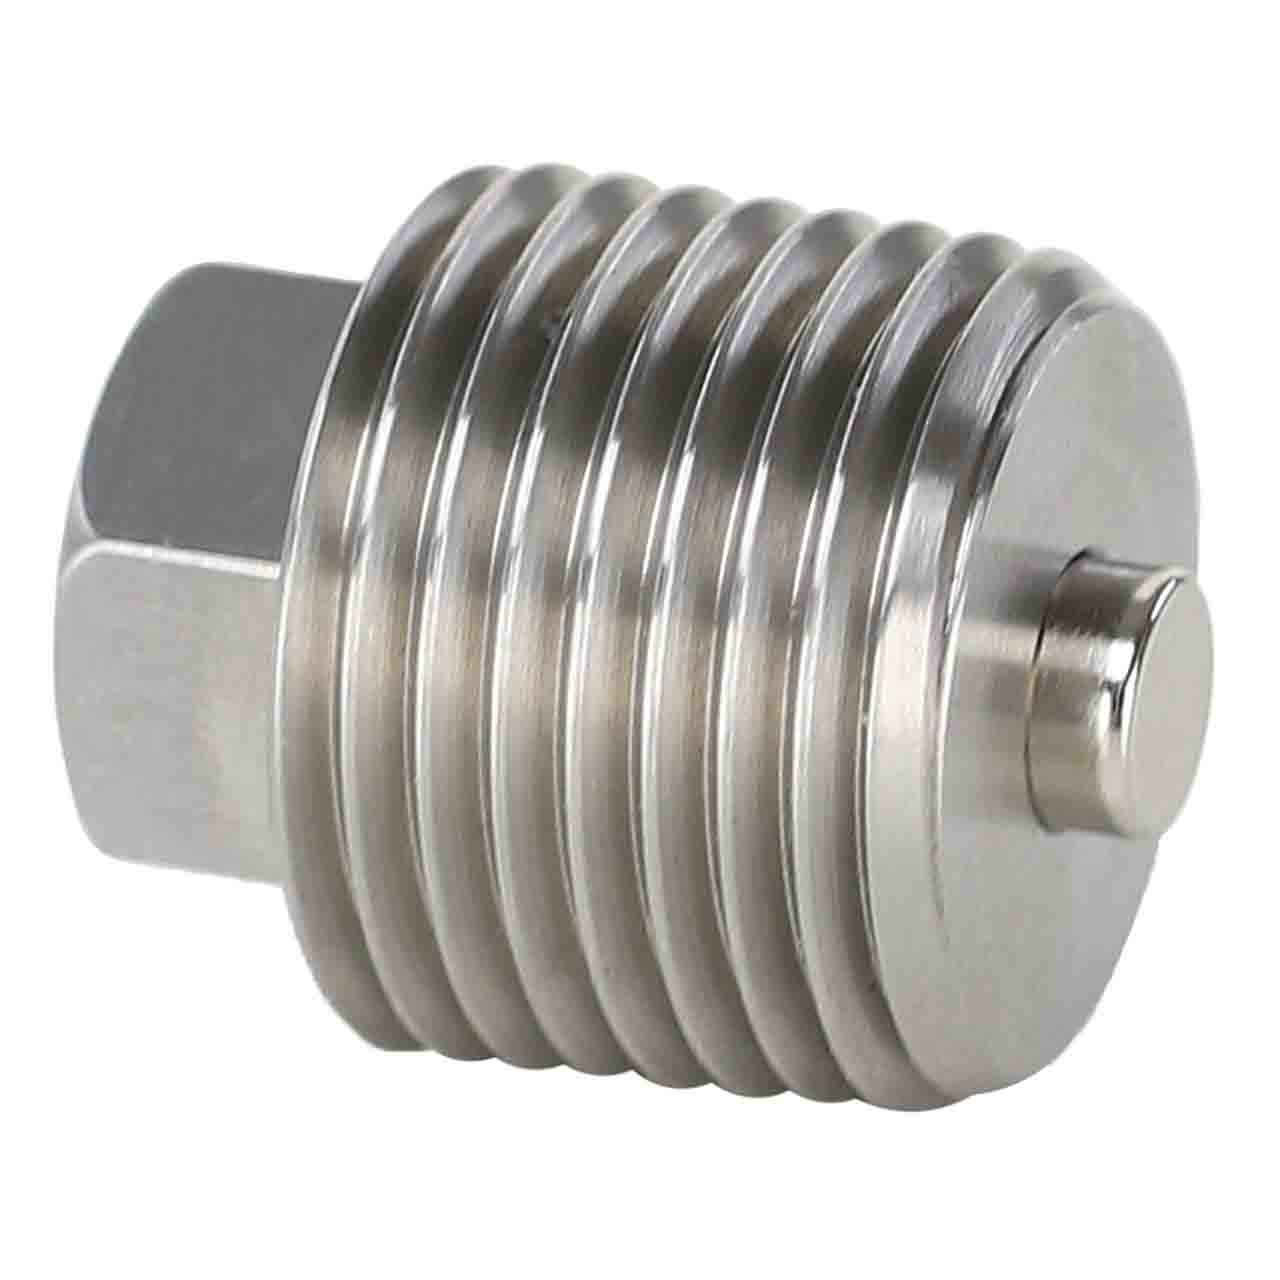 390943-S101 for Ford - Stainless Steel Transmission Oil Drain Plug with Neodymium Magnet